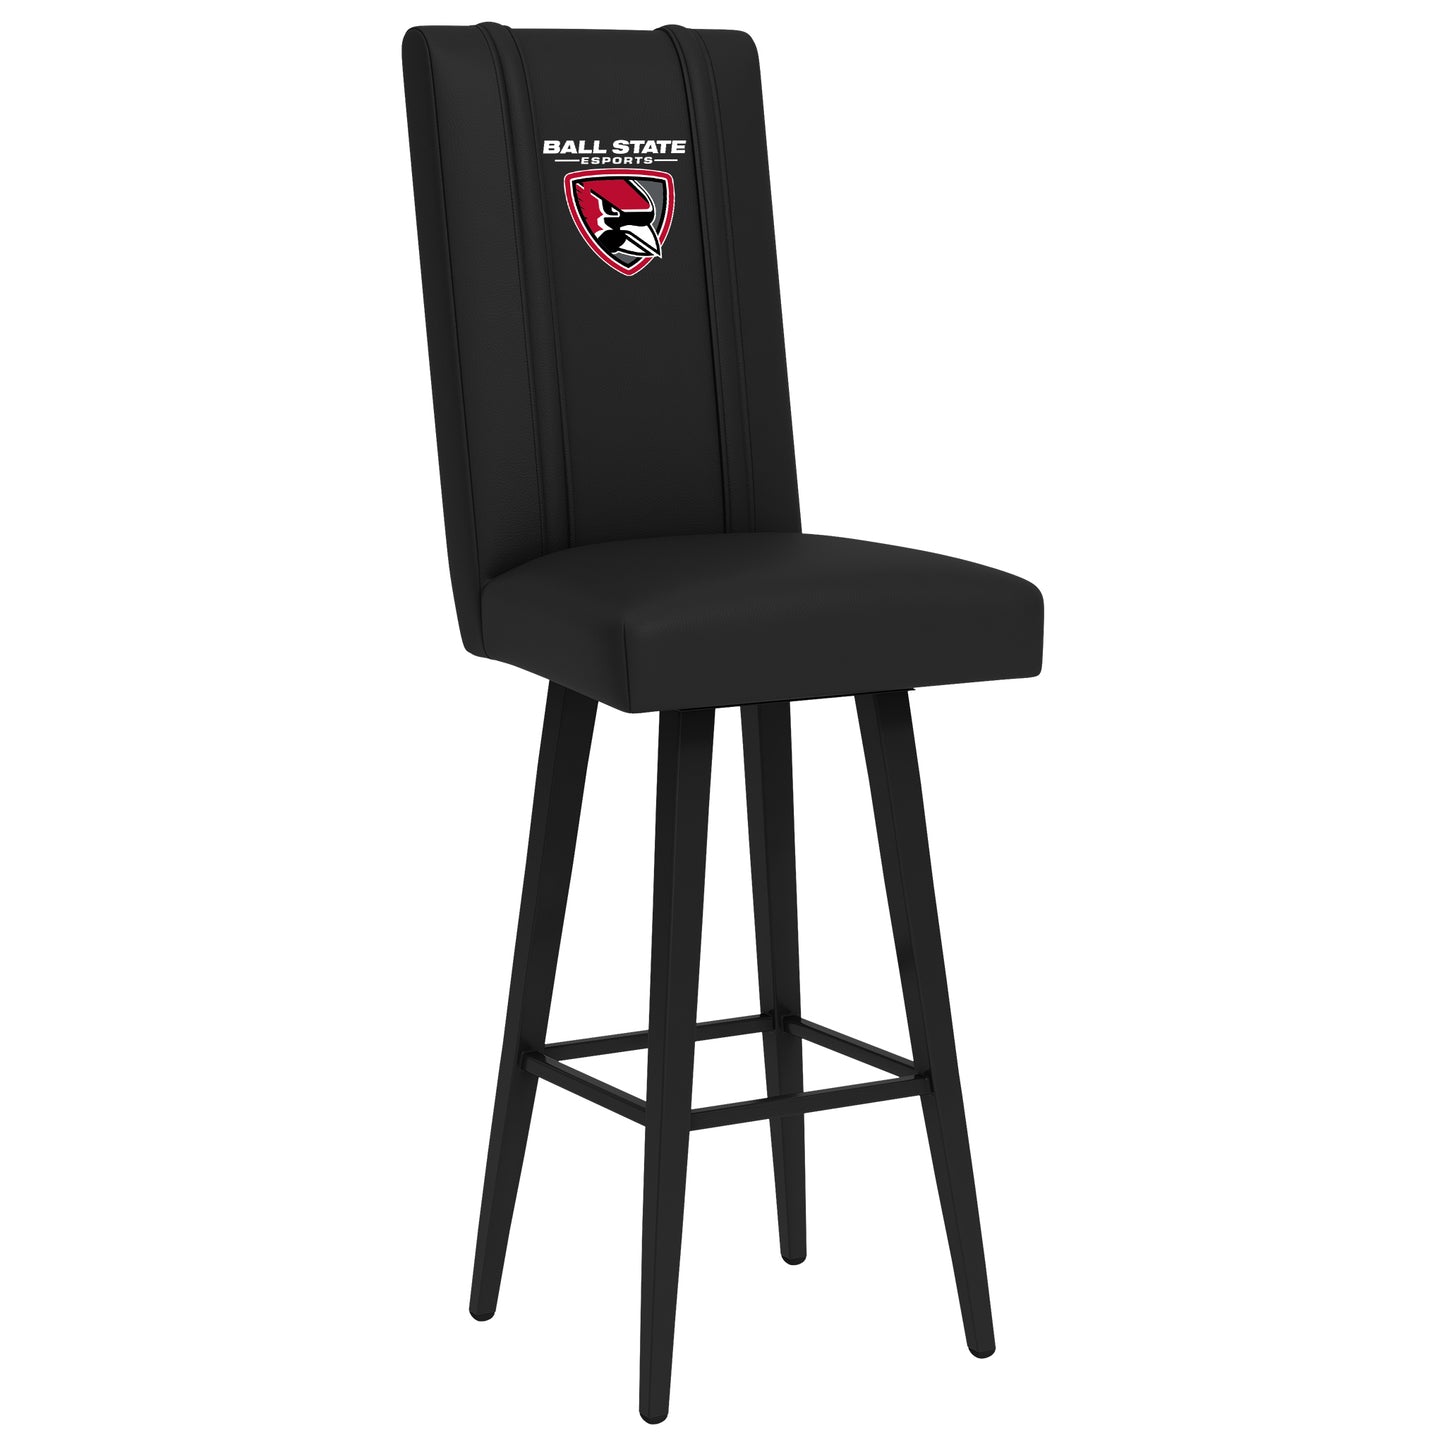 Swivel Bar Stool 2000 with Ball State Esports